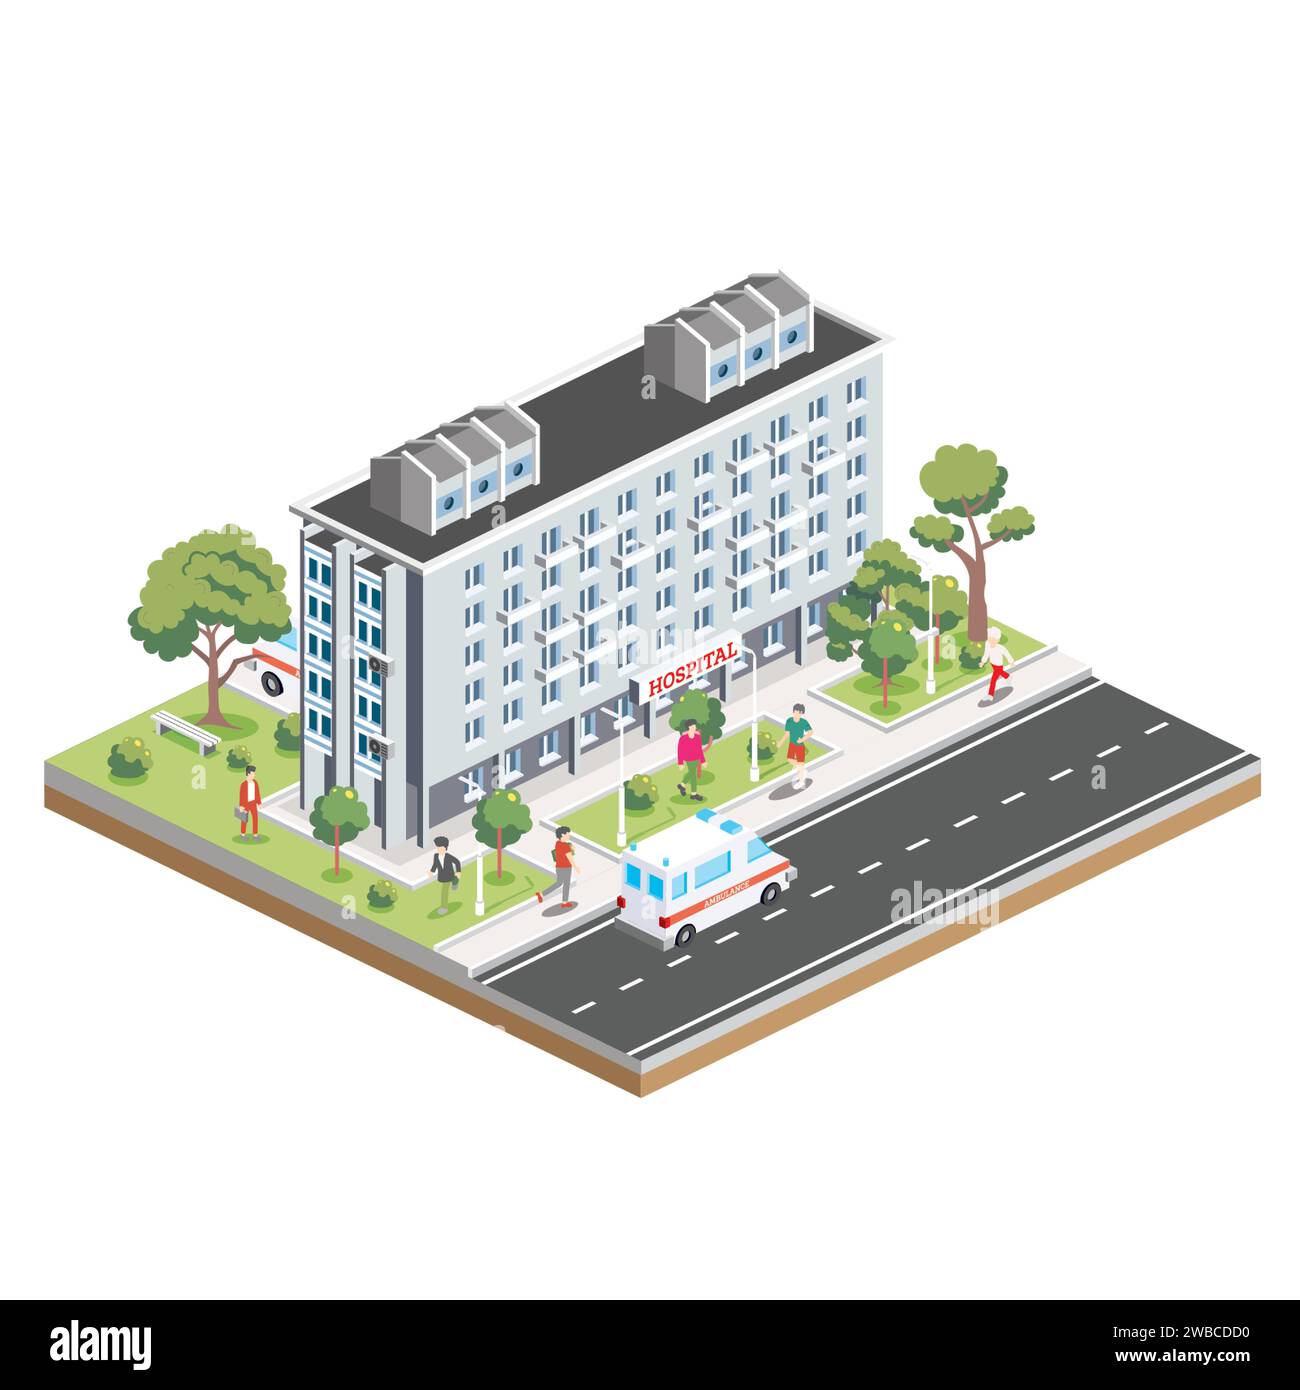 Isometric building of hospital. Icon or infographic element. Vector illustration. City clinic. Architectural symbol isolated on white background. Stock Vector